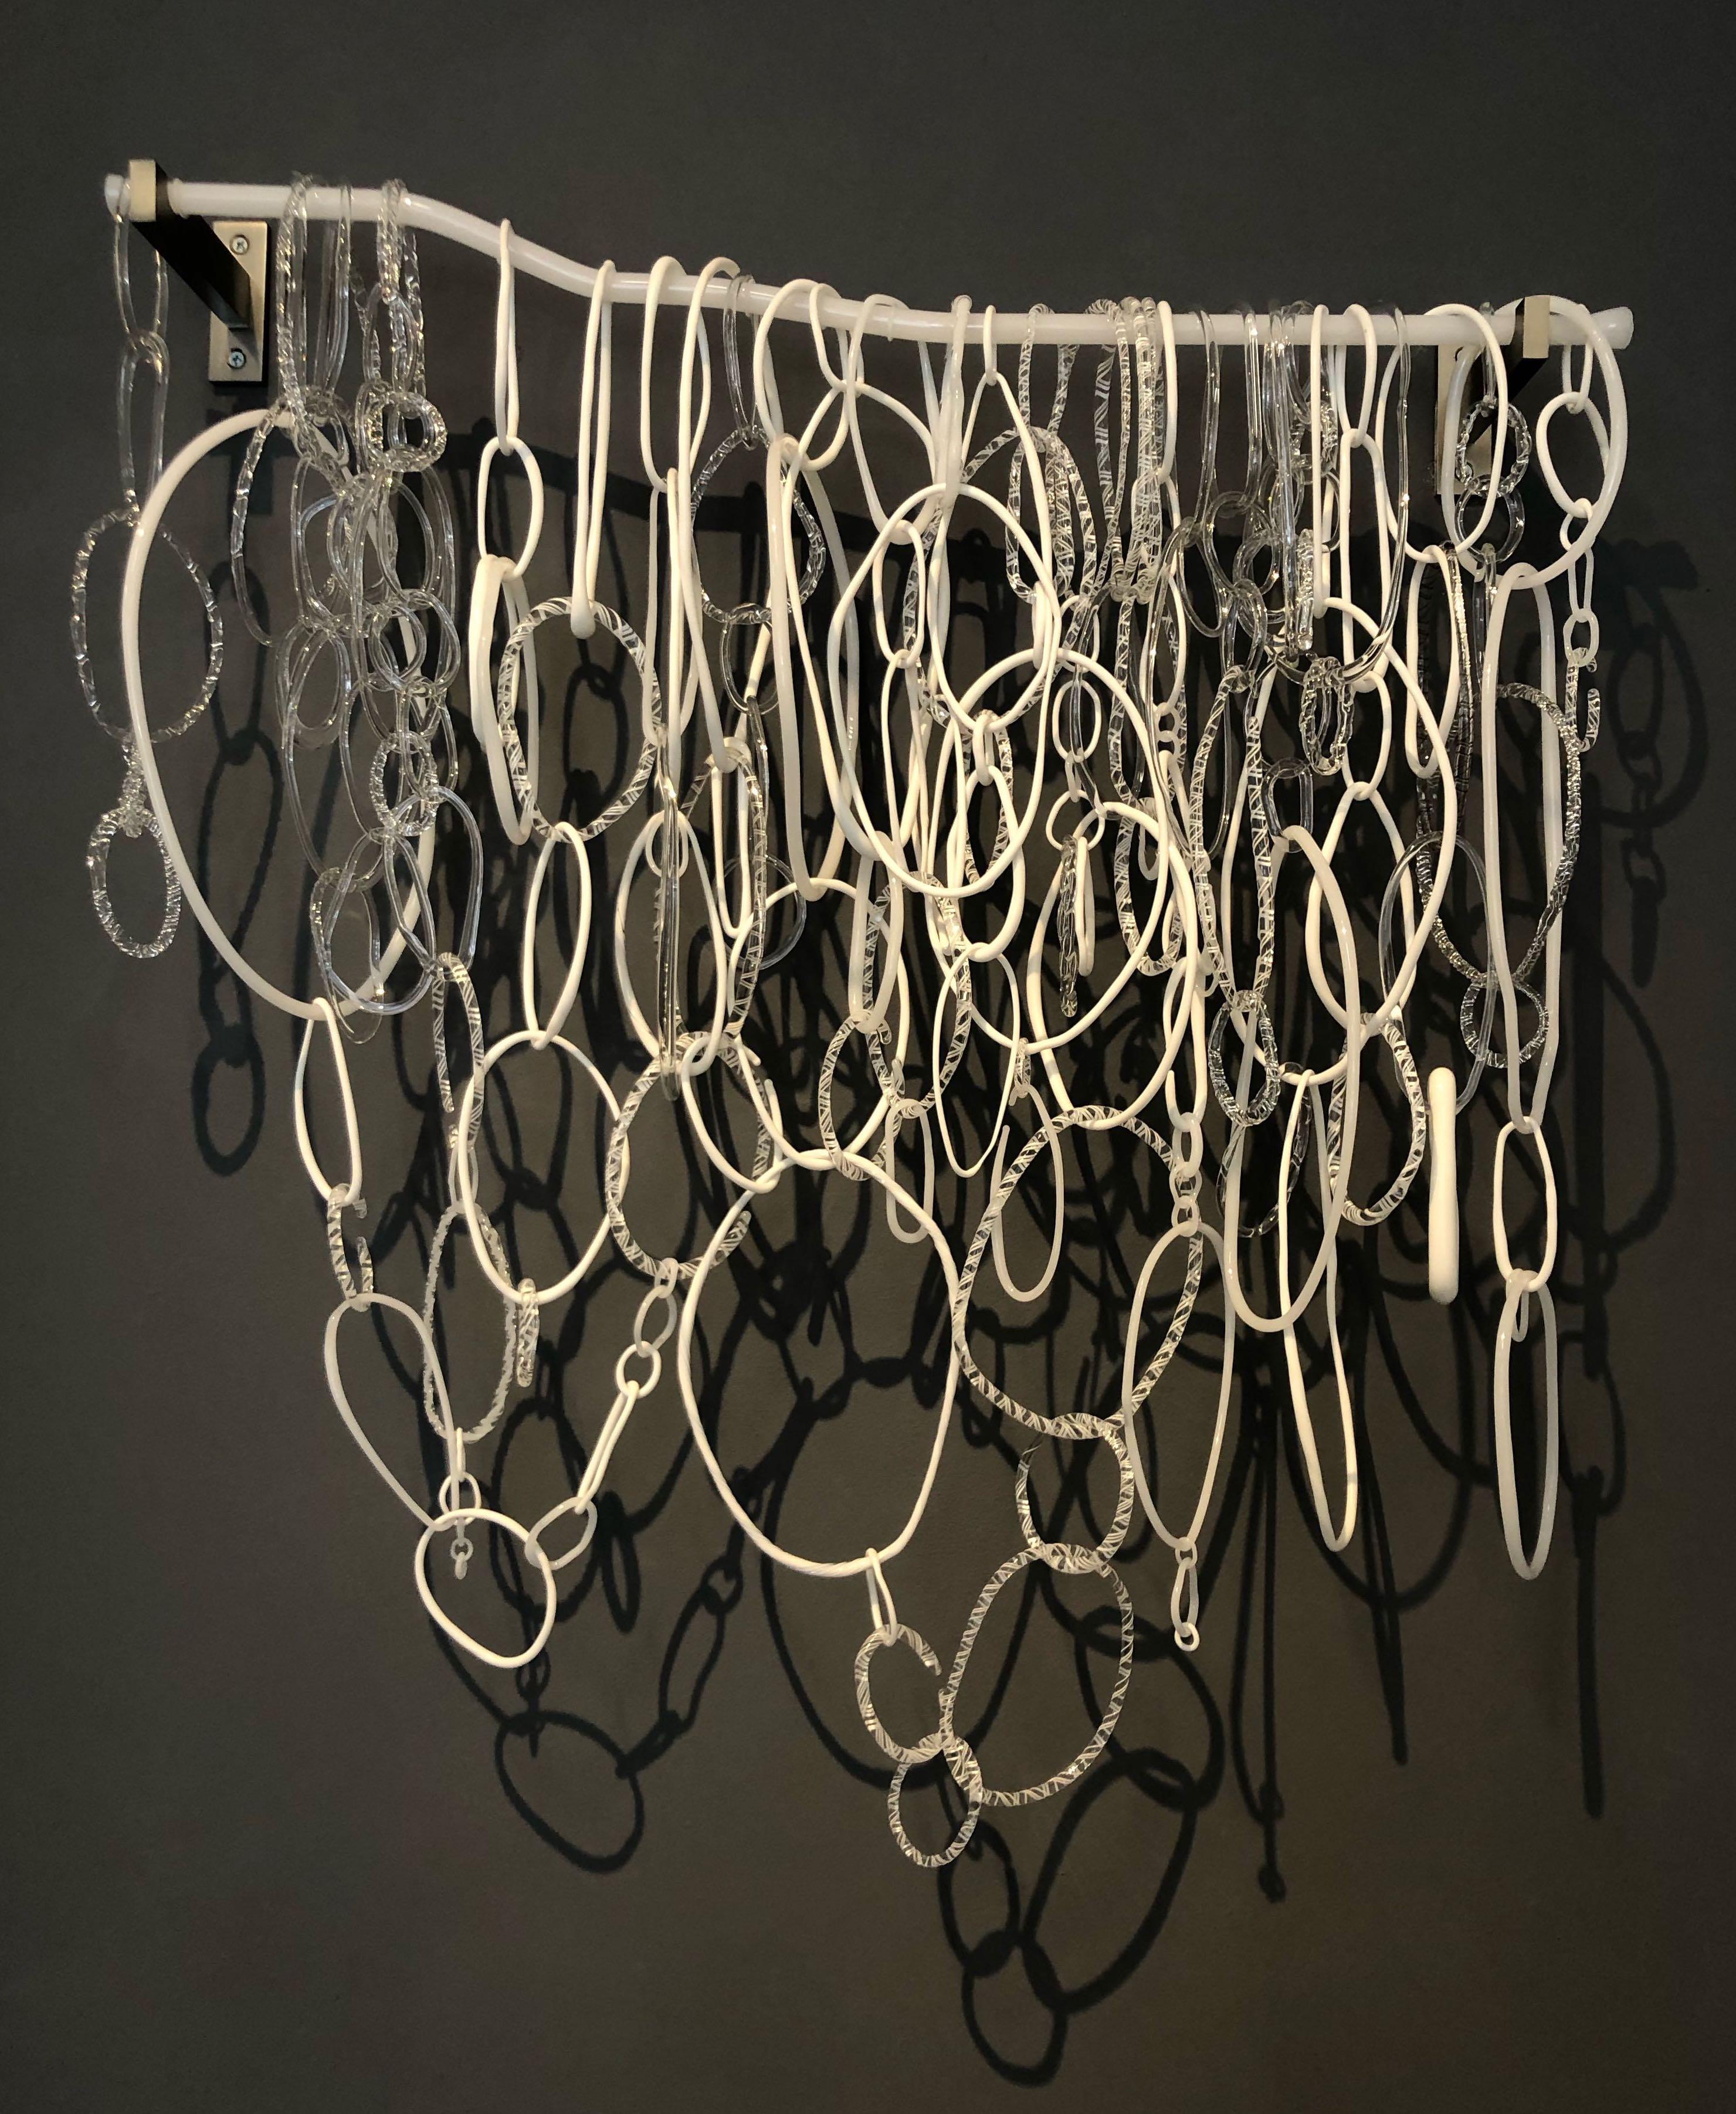 David Licata Abstract Sculpture - Winter Falls, Hanging Wall Sculpture, White, Clear Torch Worked Glass Loops